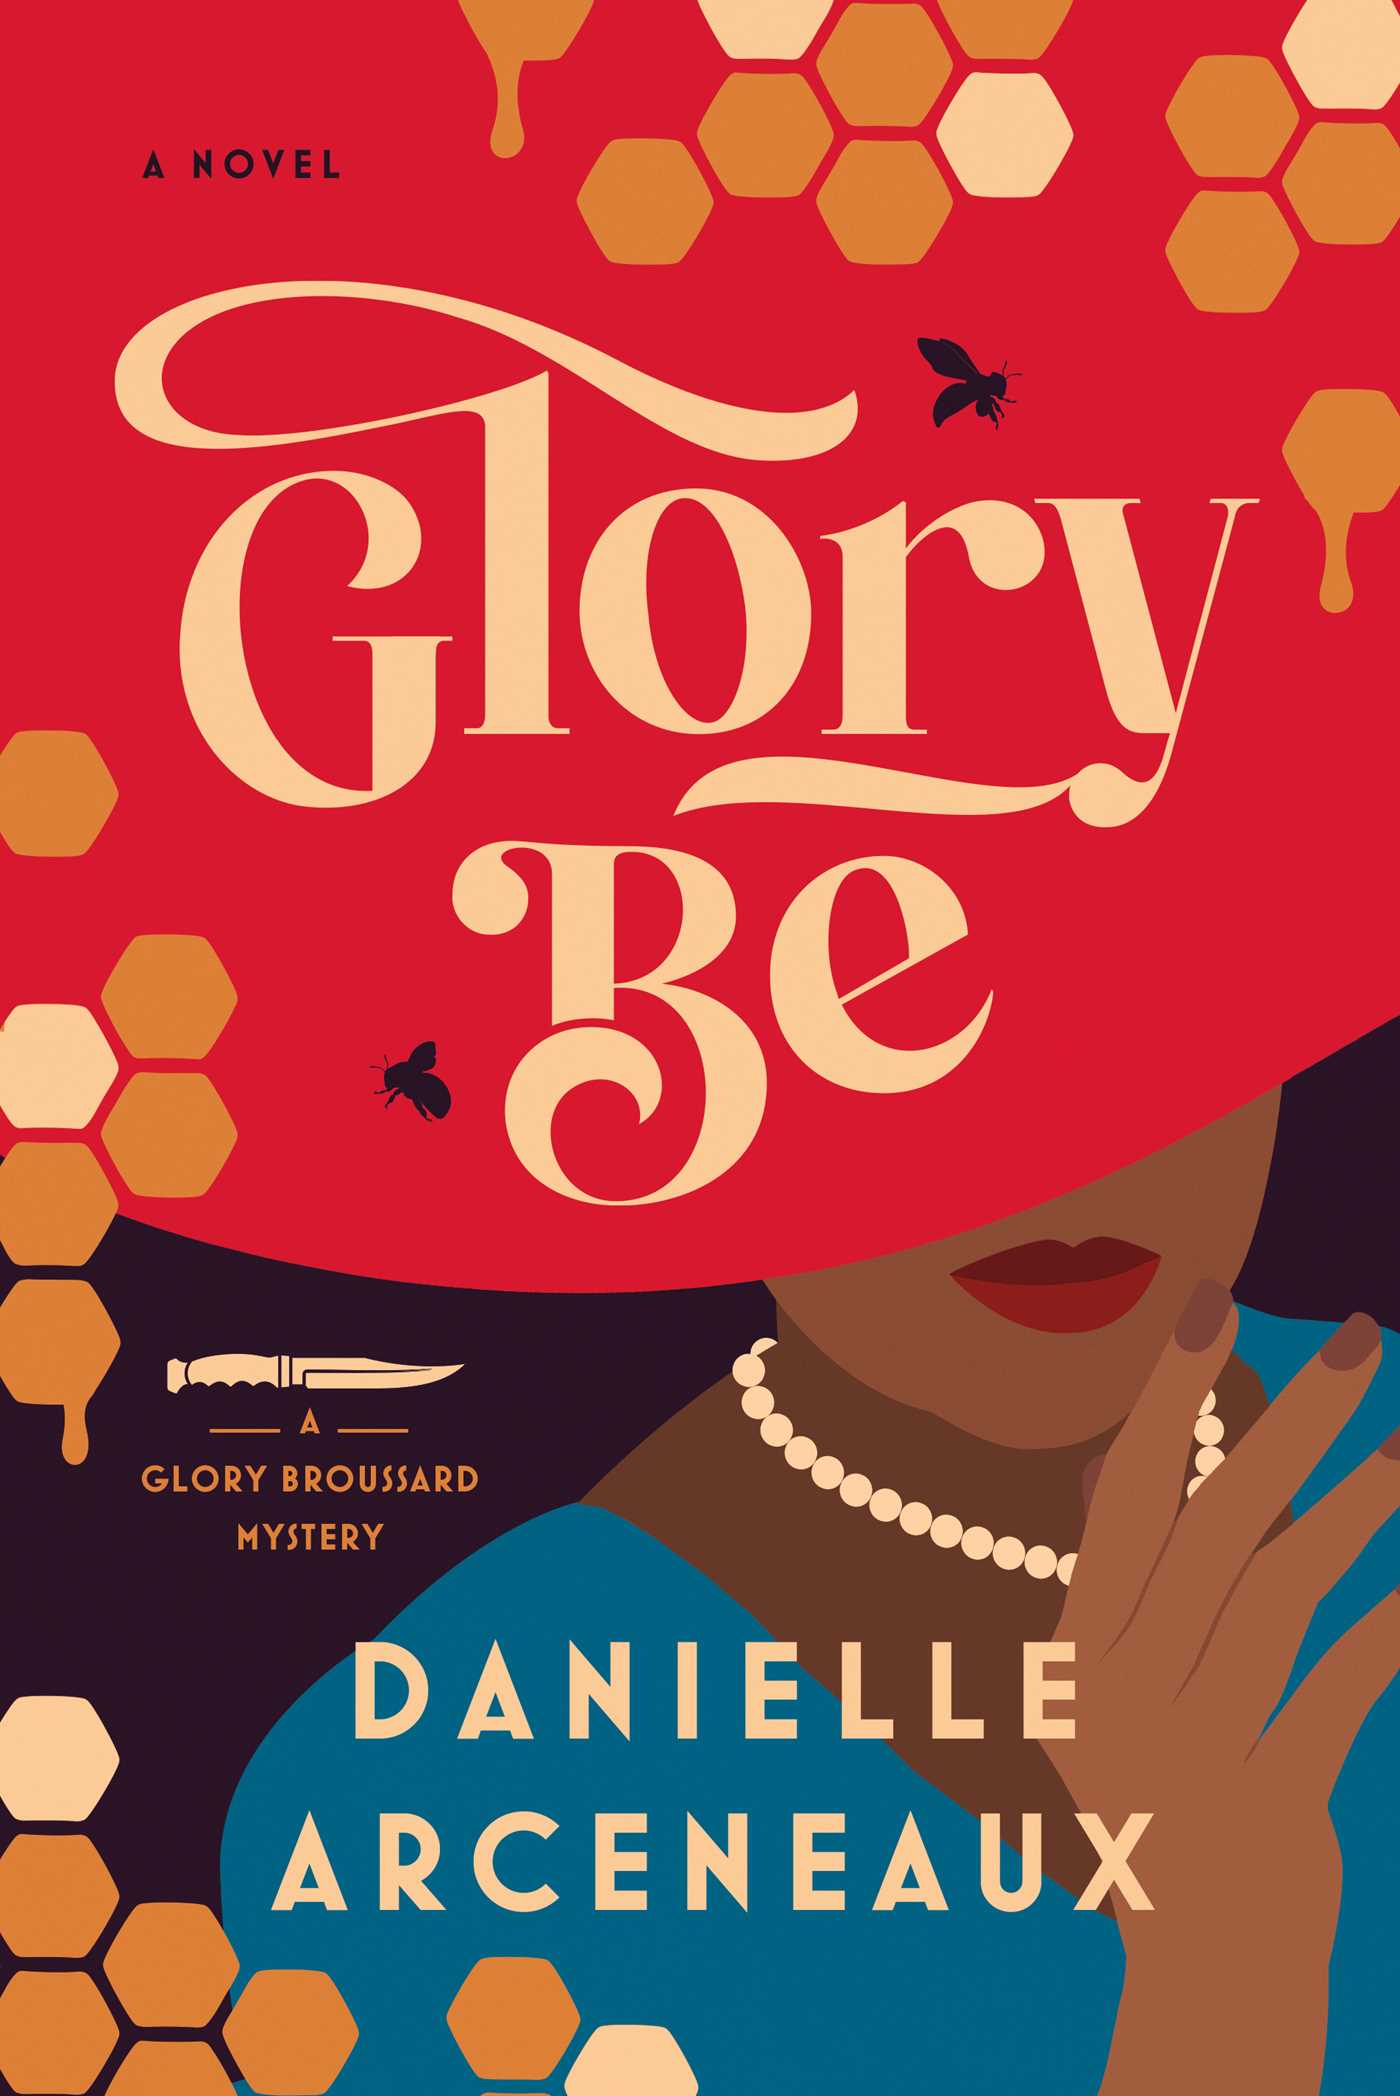 Book cover to Glory Be by Danielle Arceneaux. The cover is an illustration of a Black woman wearing a large red hat, which takes up most of the cover. There are also silhouettes of two bees and a knife on the cover. 